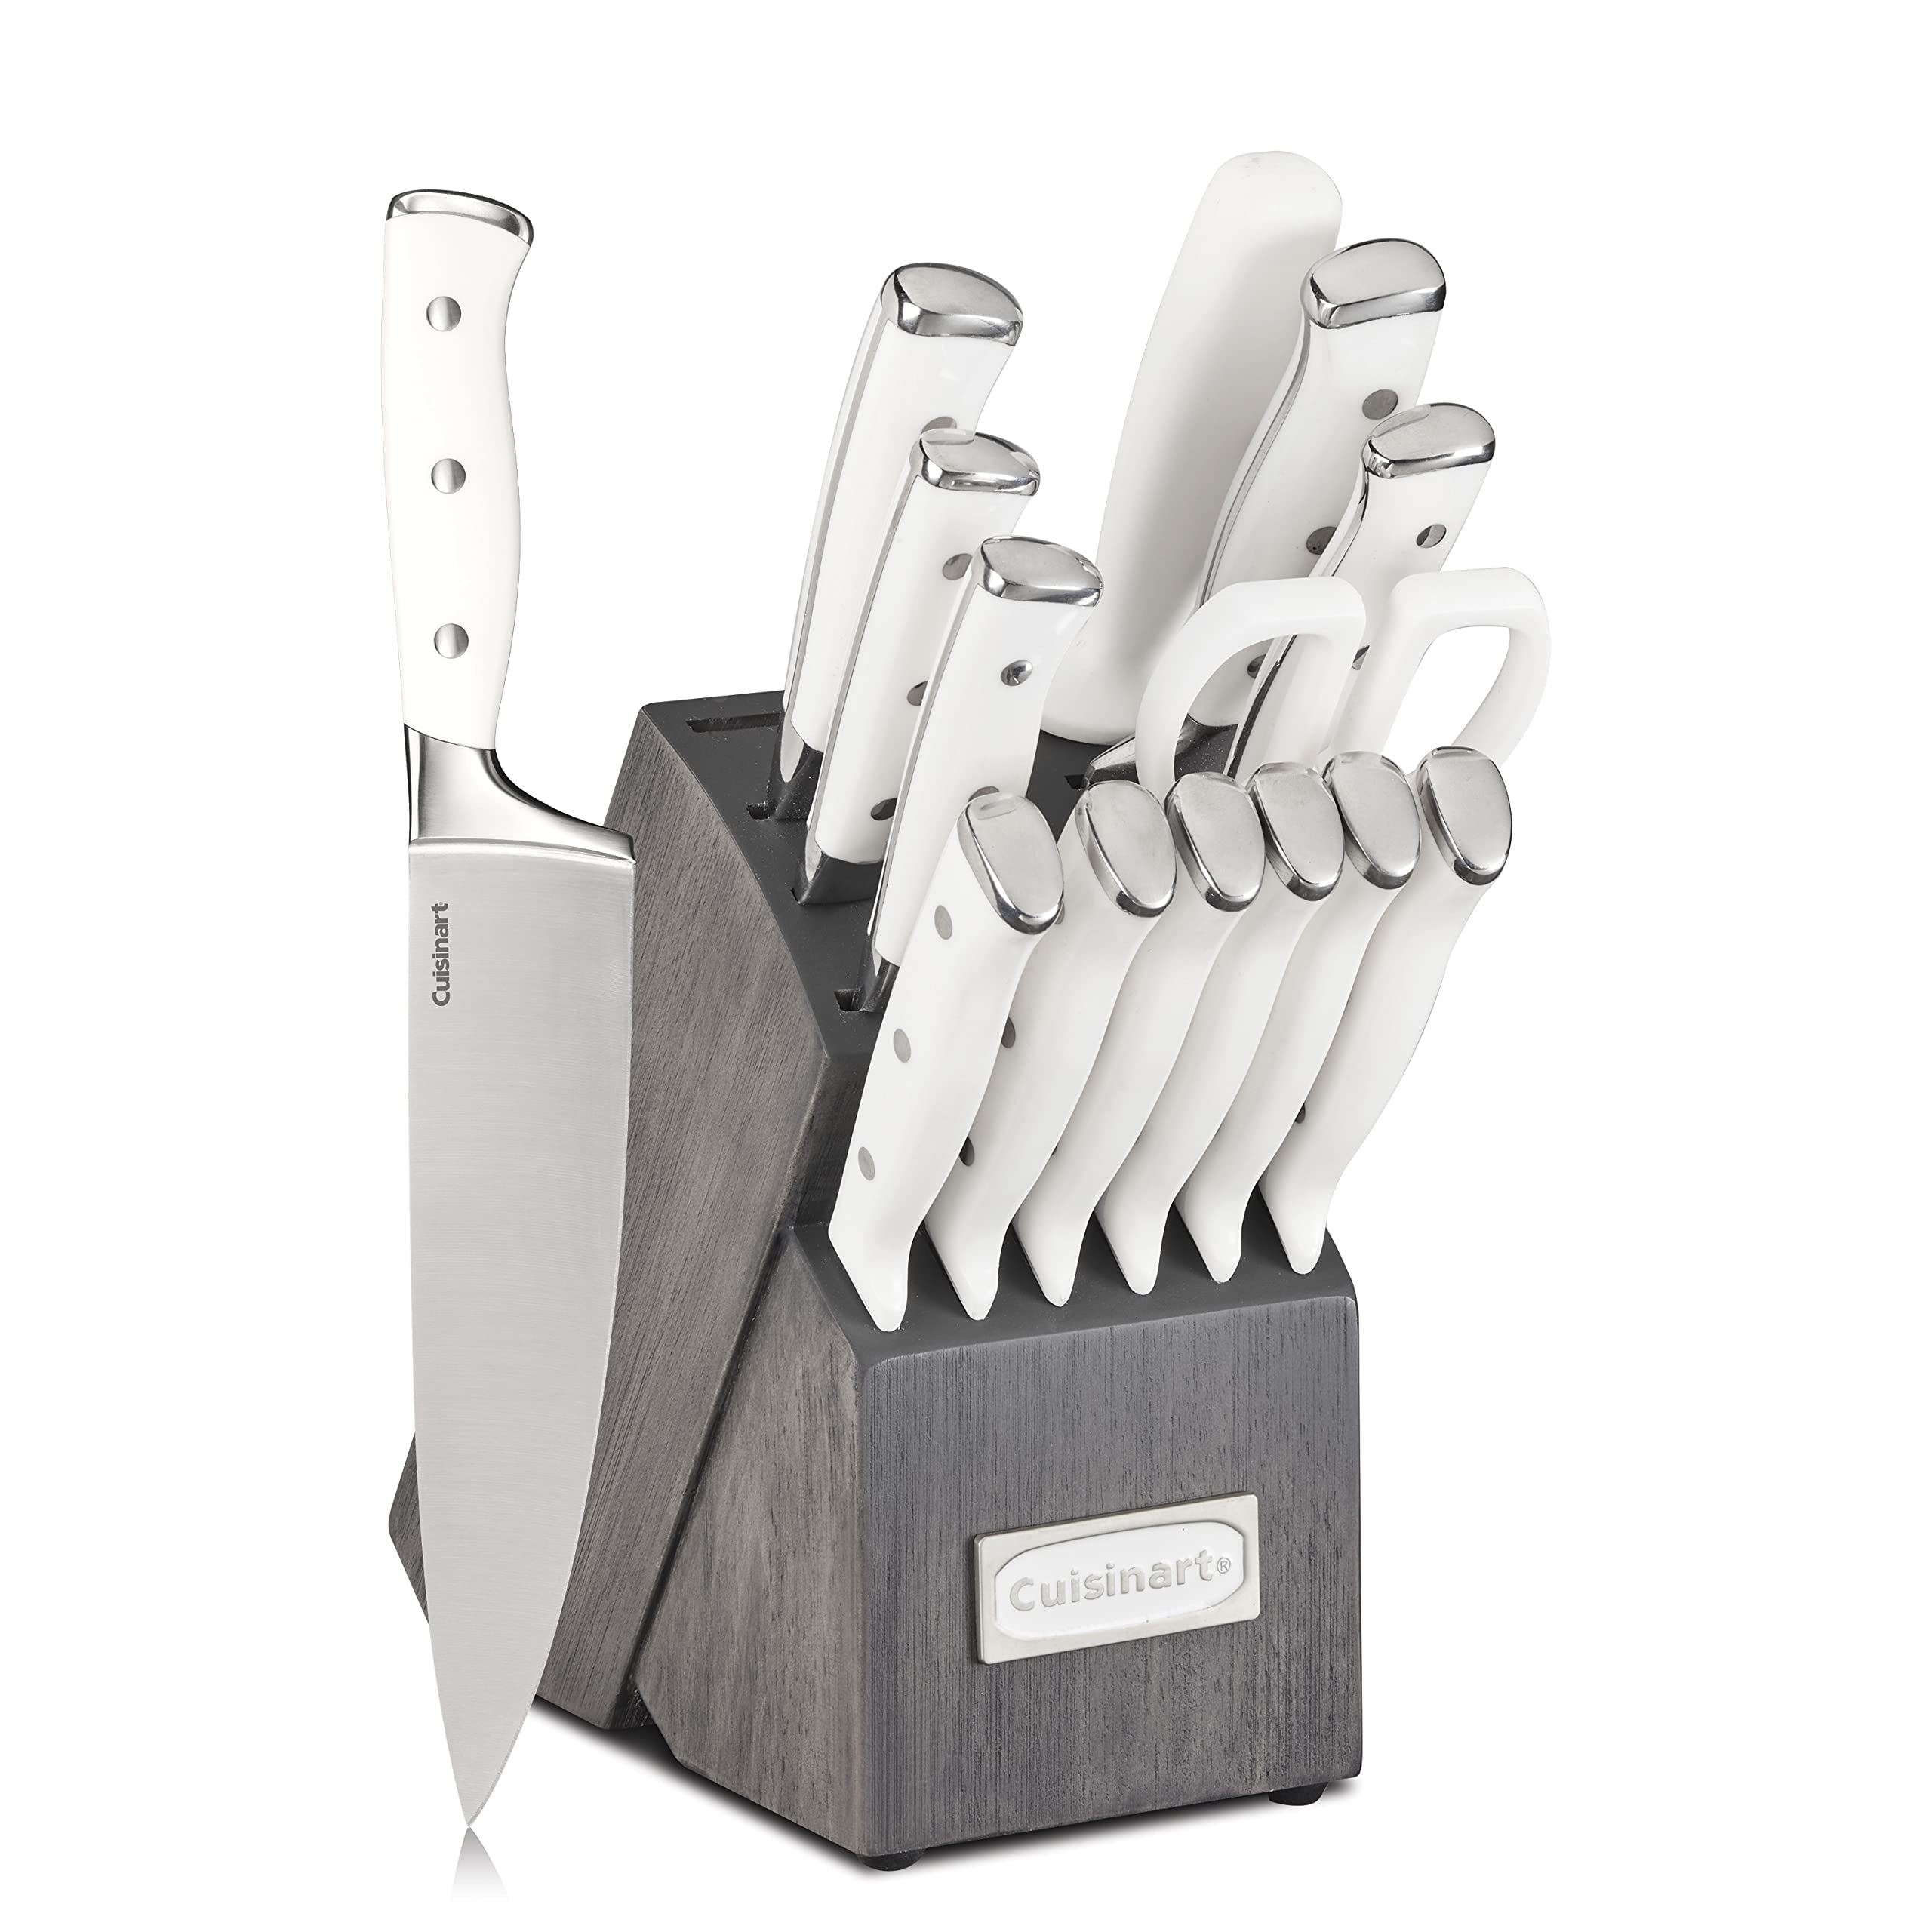 Cuisinart Forged Triple Rivet, 15-Piece Knife Set w/ Block, Superior High-Carbon Stainless Steel Blades for Precision & Accuracy, White/Charcoal Grey